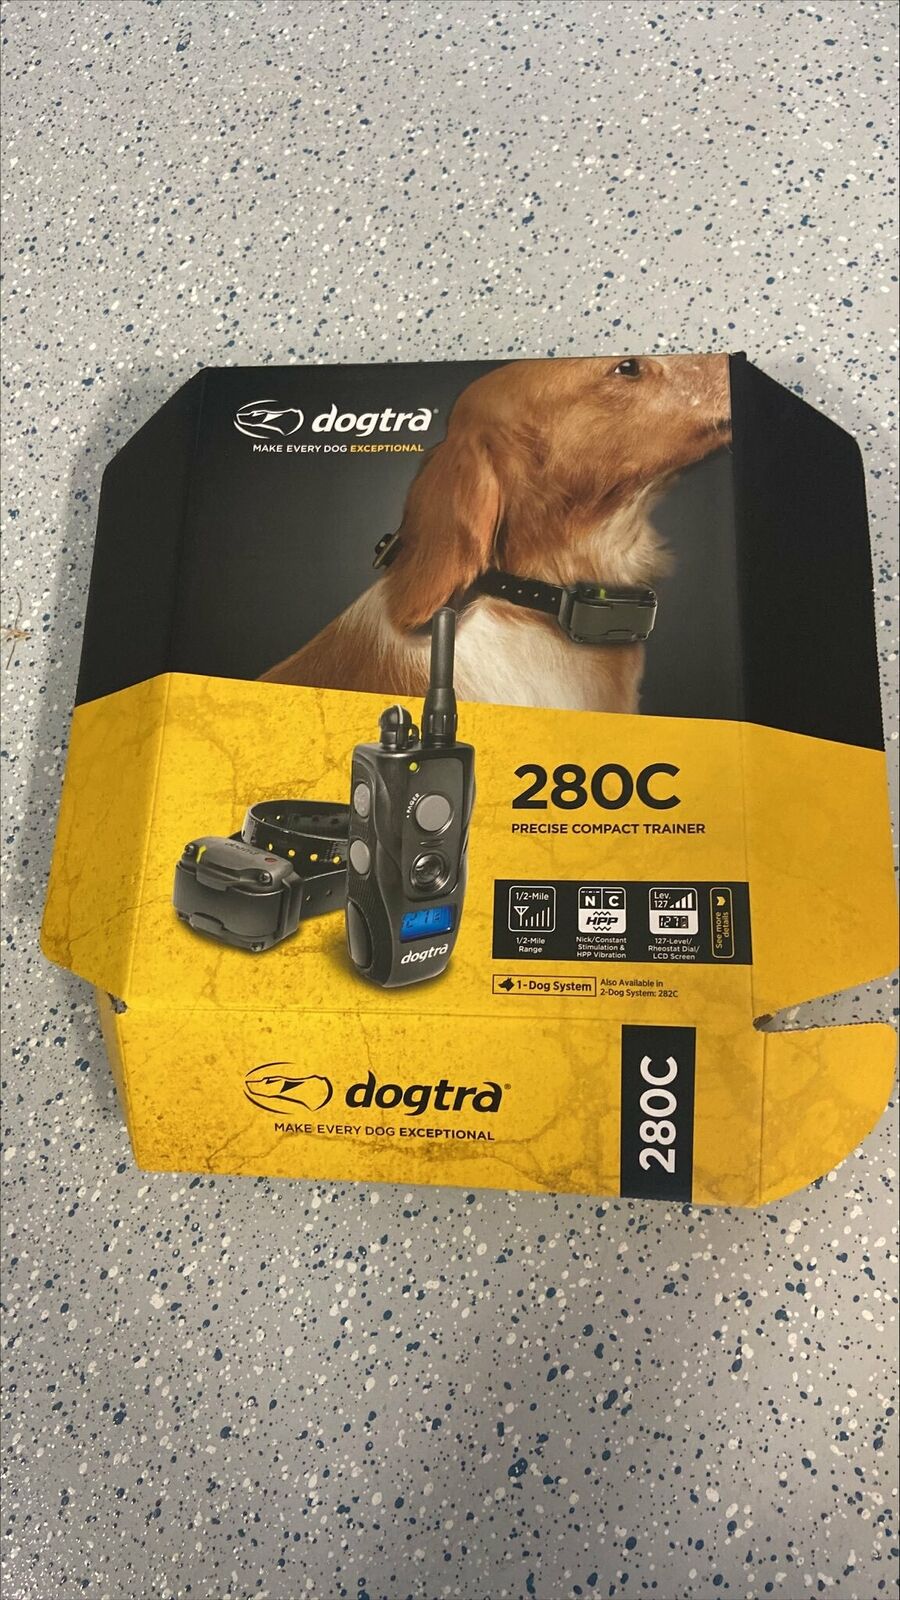 Dogtra 280c Used Excellent Condition! With Black Bungee!